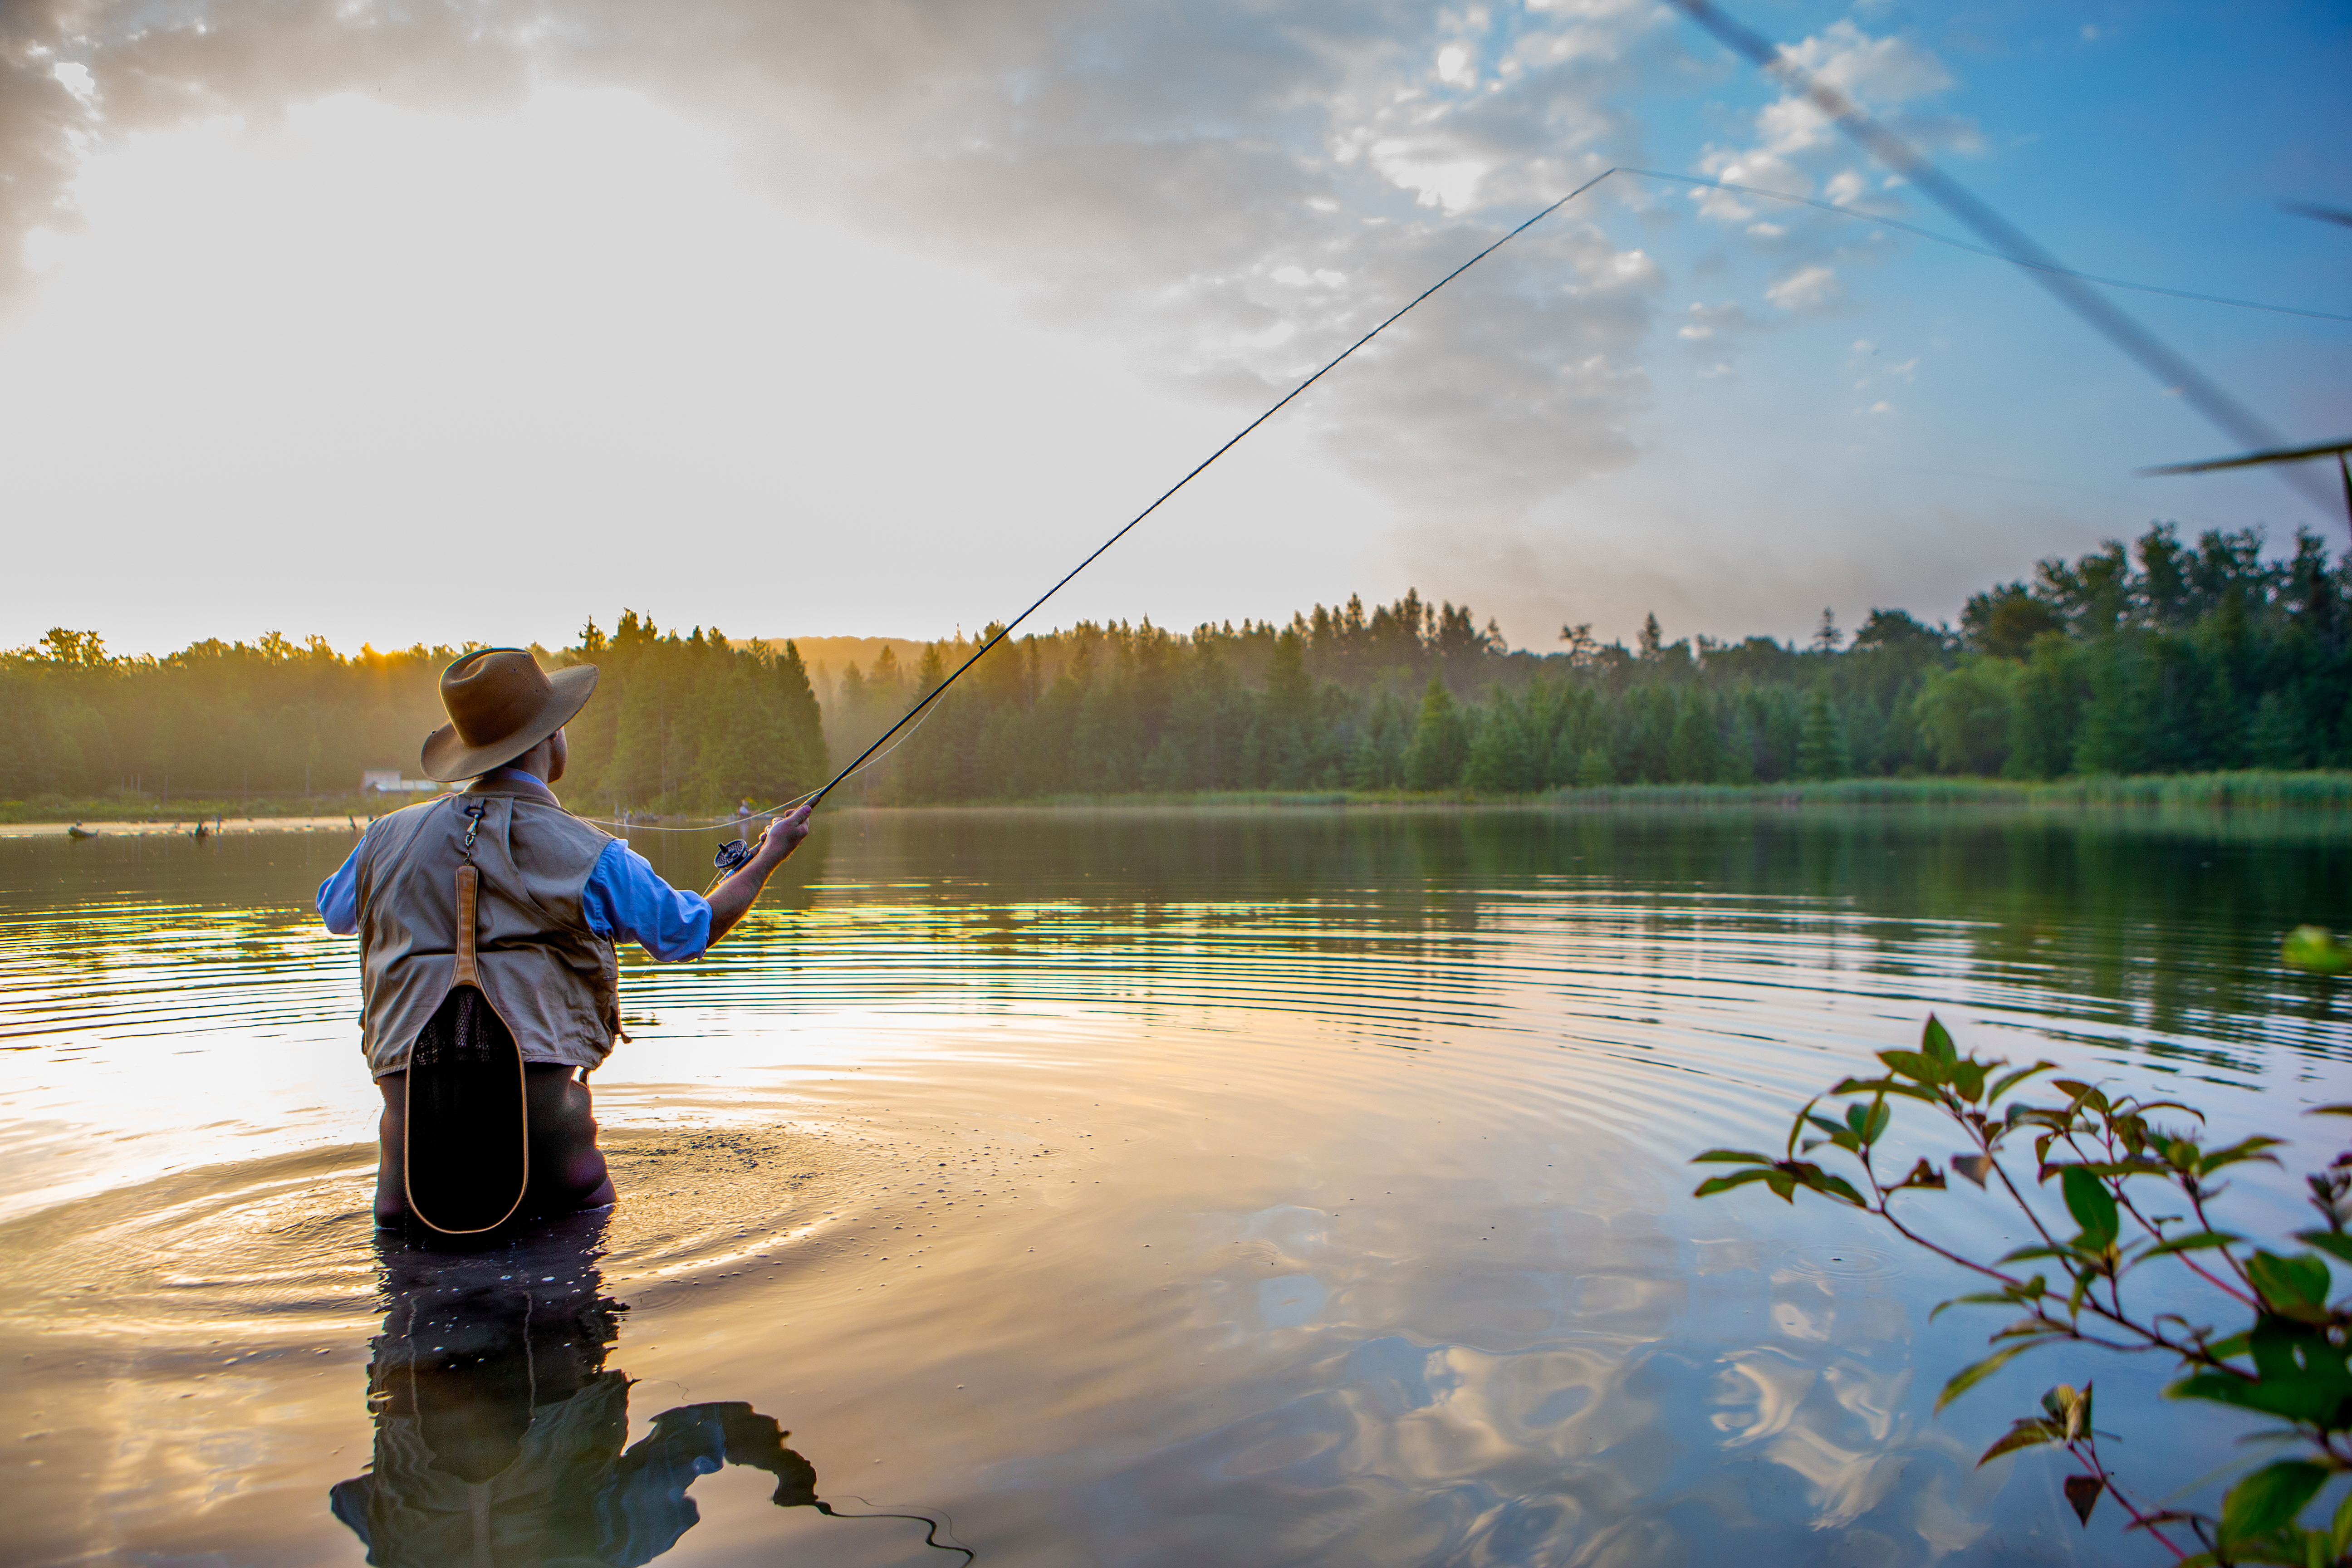 A Glossary of Fly Fishing Terms Every Angler Should Know